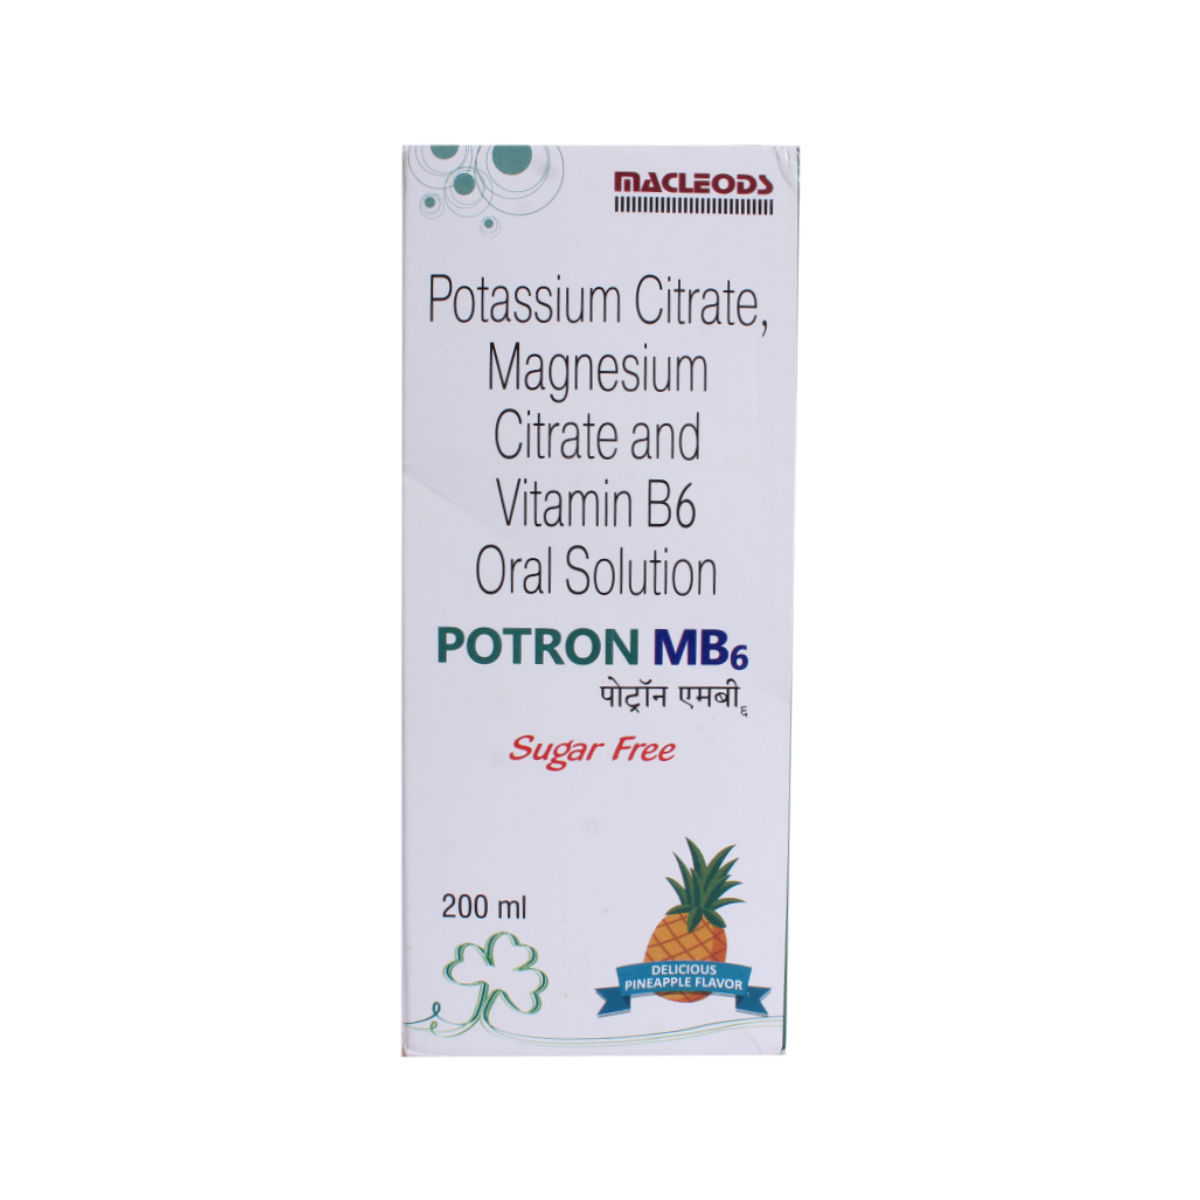 Potron MB6 Sugar Free Pineapple Oral Solution 200 ml, Pack of 1 ORAL SOLUTION